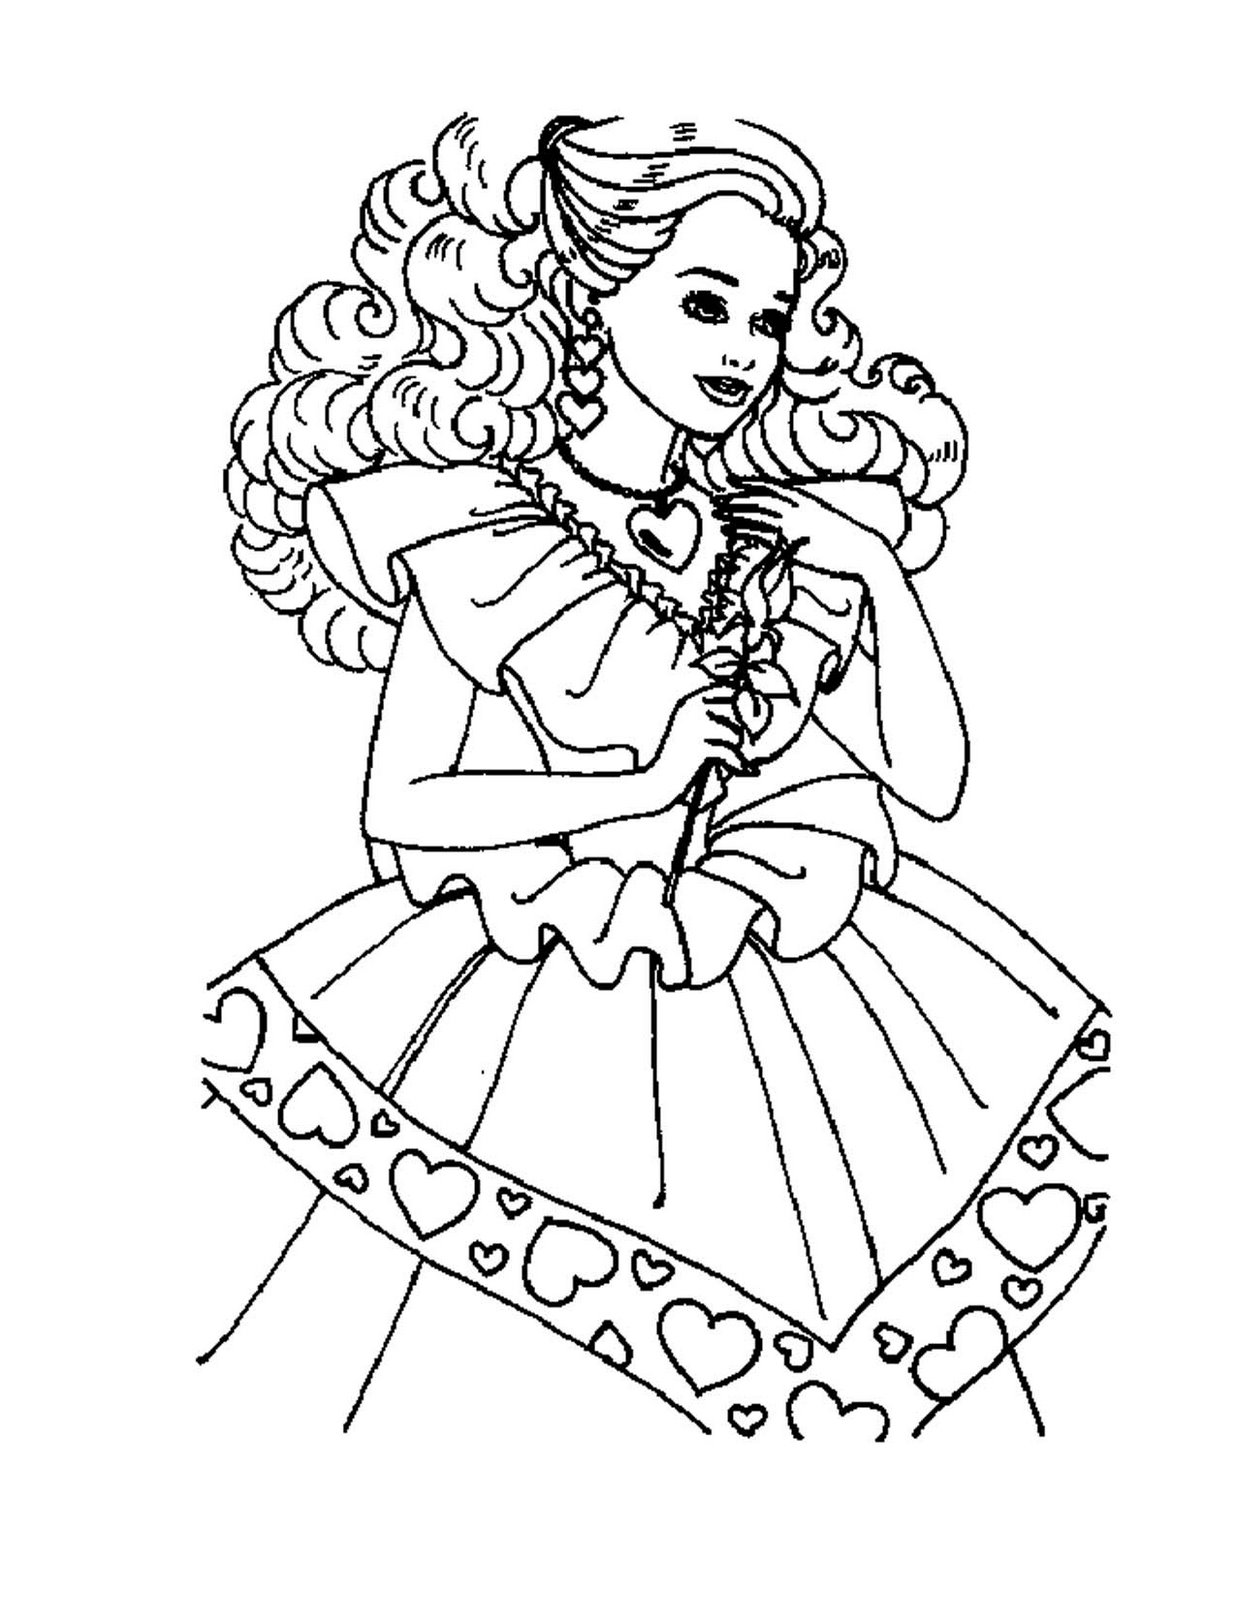 Download PRINCESS COLORING PAGES